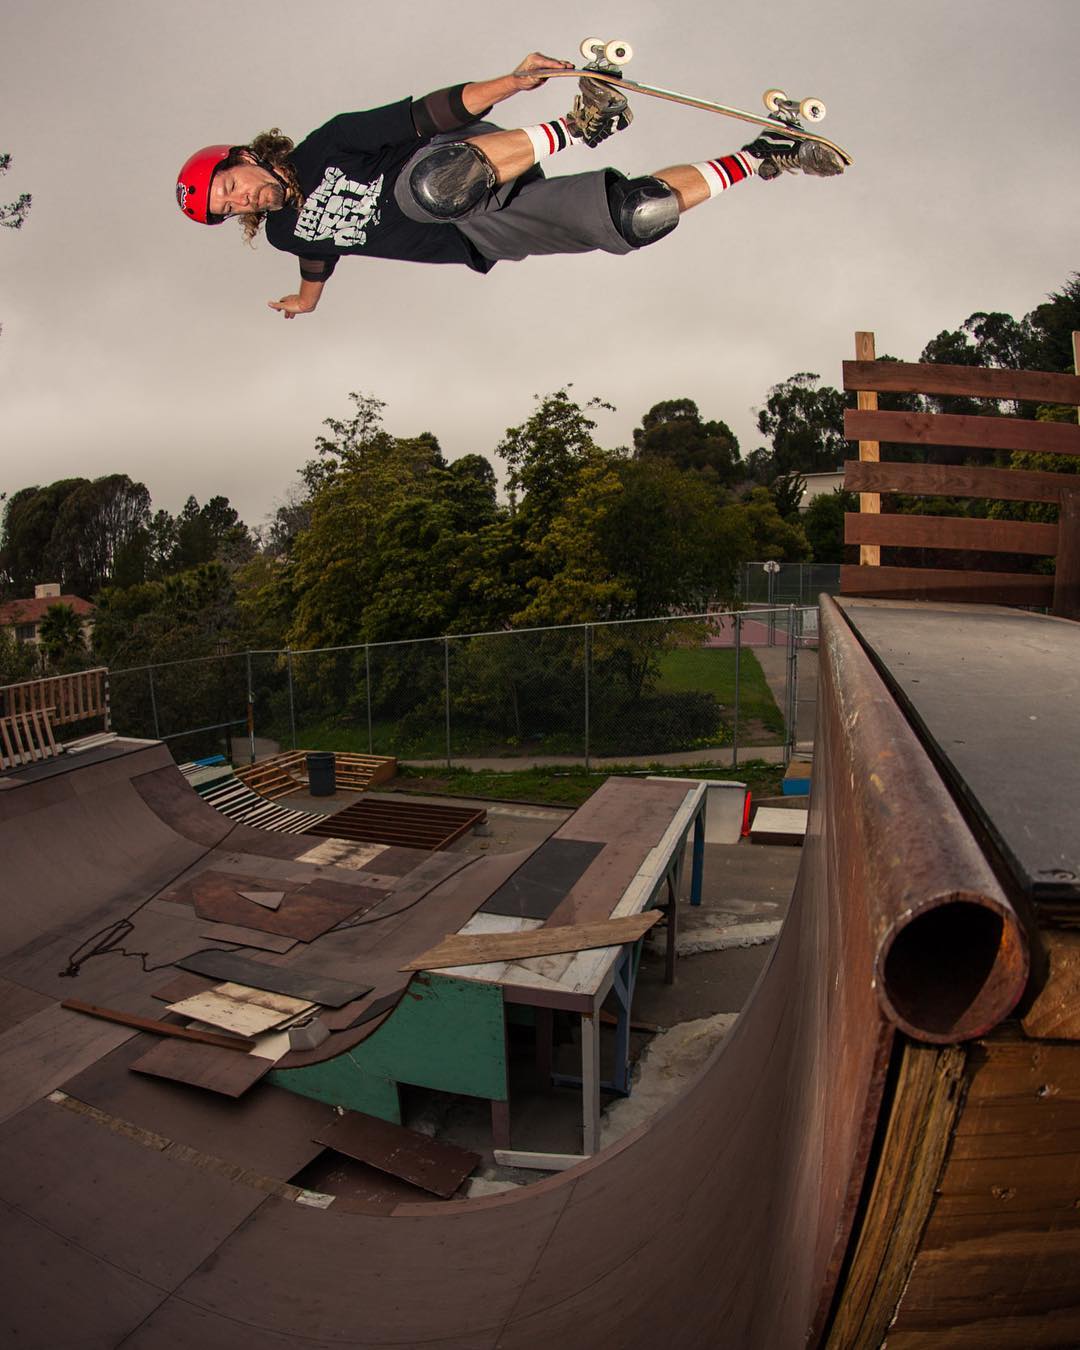 Ffej with a backside air on the extention at Berkeley Vert earlier this year @instaffej.com